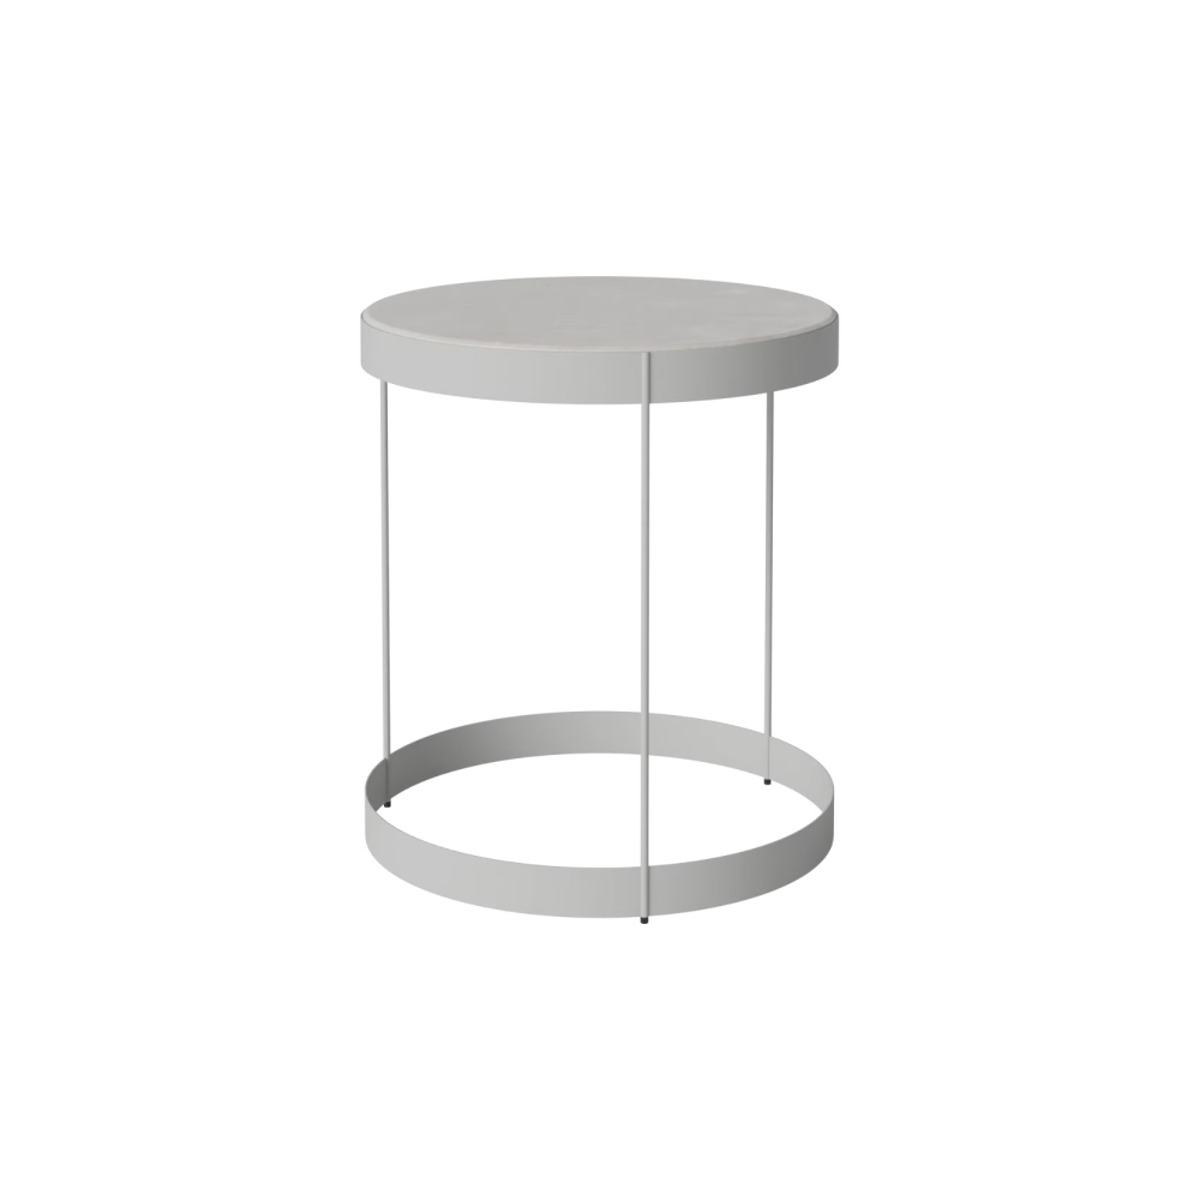 BOLIA [Outdoor] Drum Lounge Table Ø40